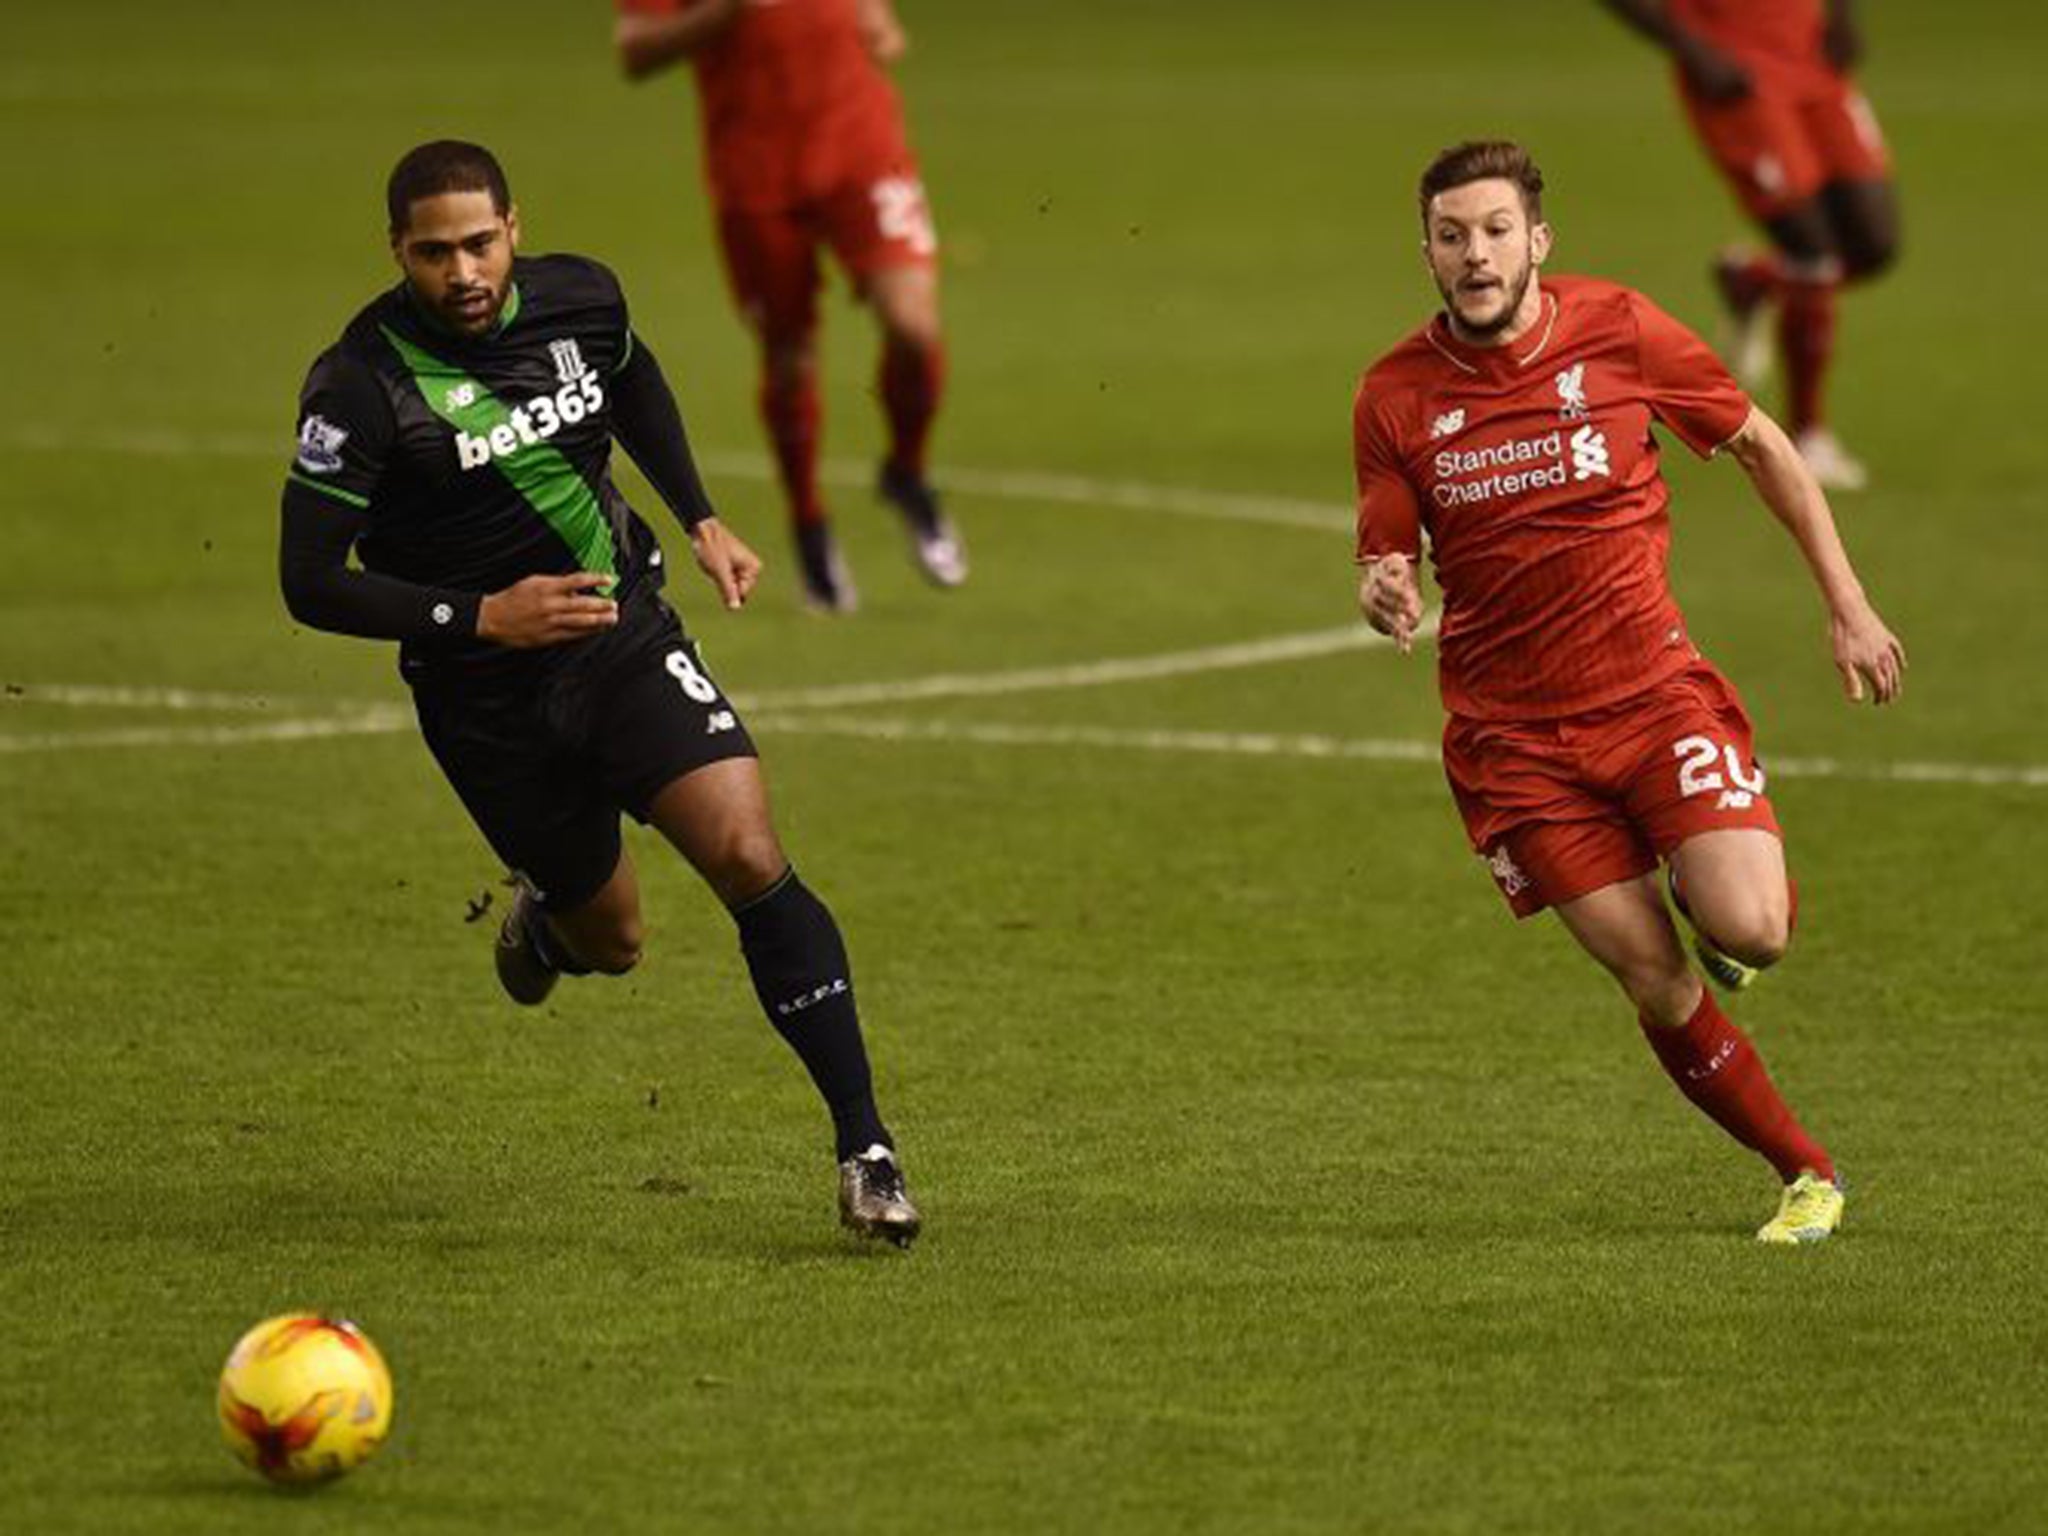 Adam Lallana (left) said Klopp’s words at half-time prompted a heated discussion among the players